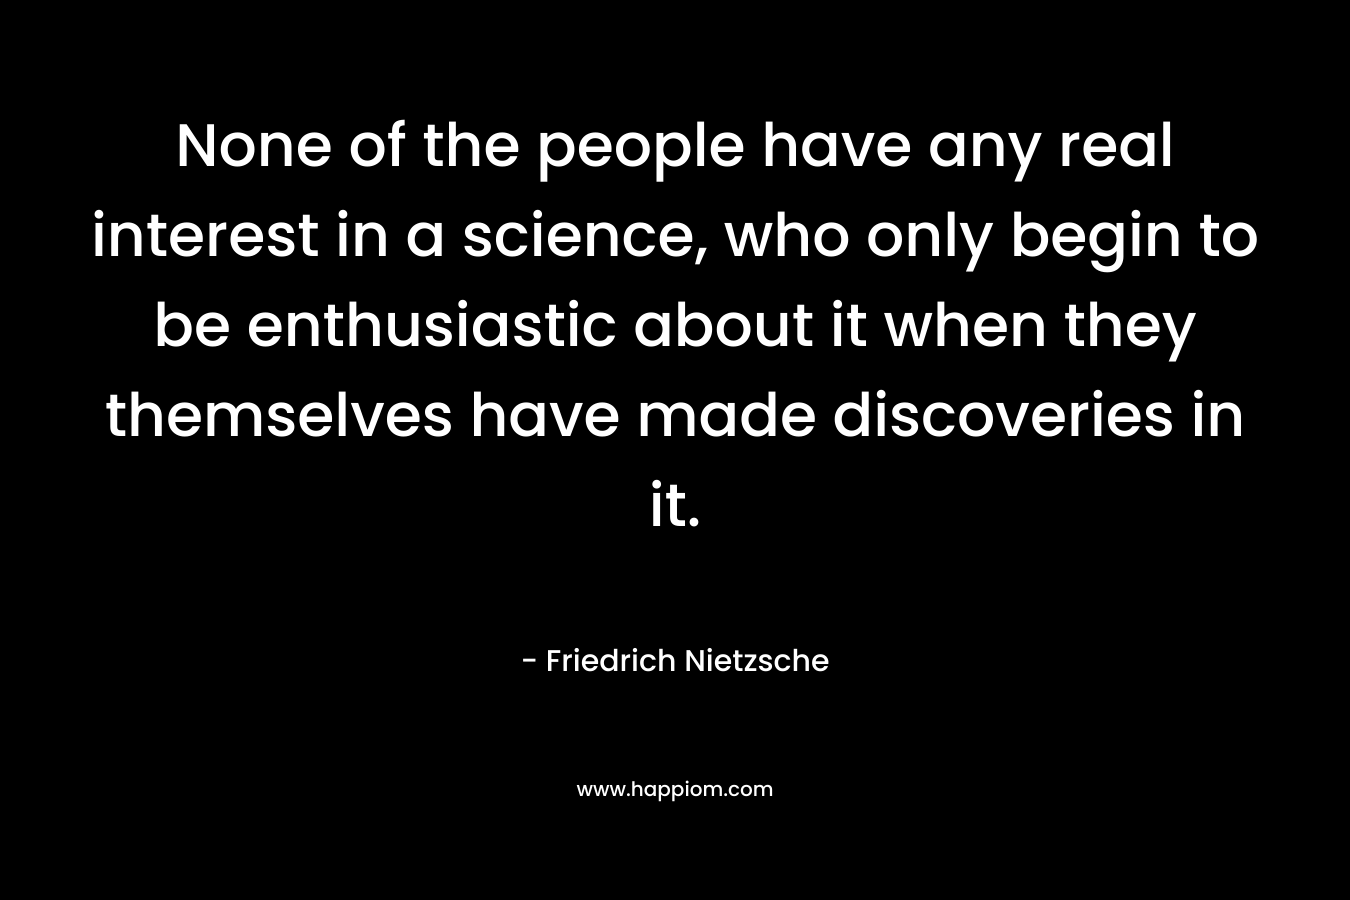 None of the people have any real interest in a science, who only begin to be enthusiastic about it when they themselves have made discoveries in it.